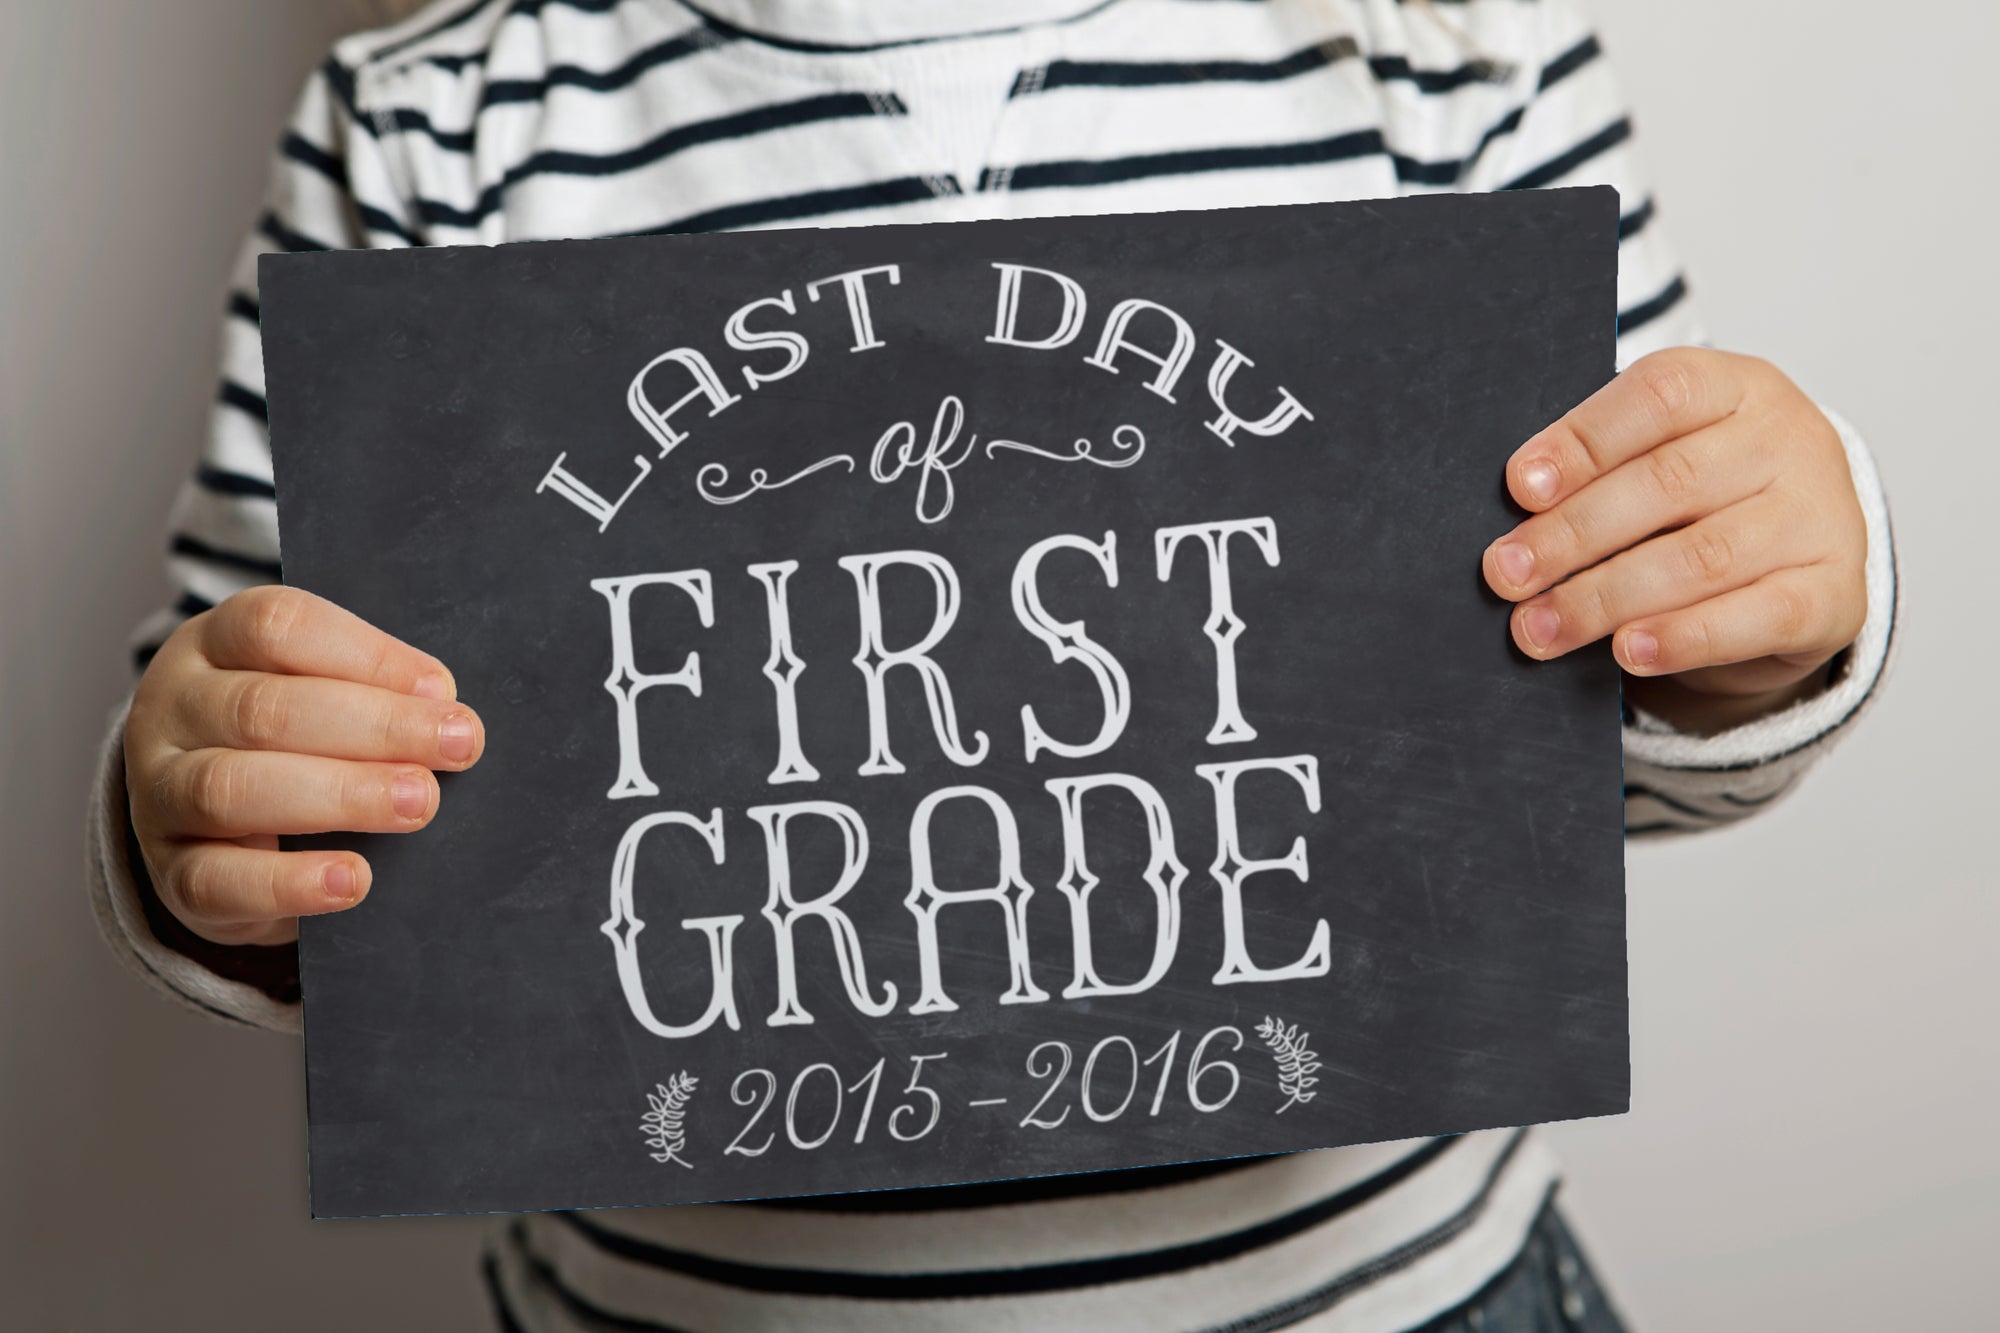 Free Printable Last Day of School Signs